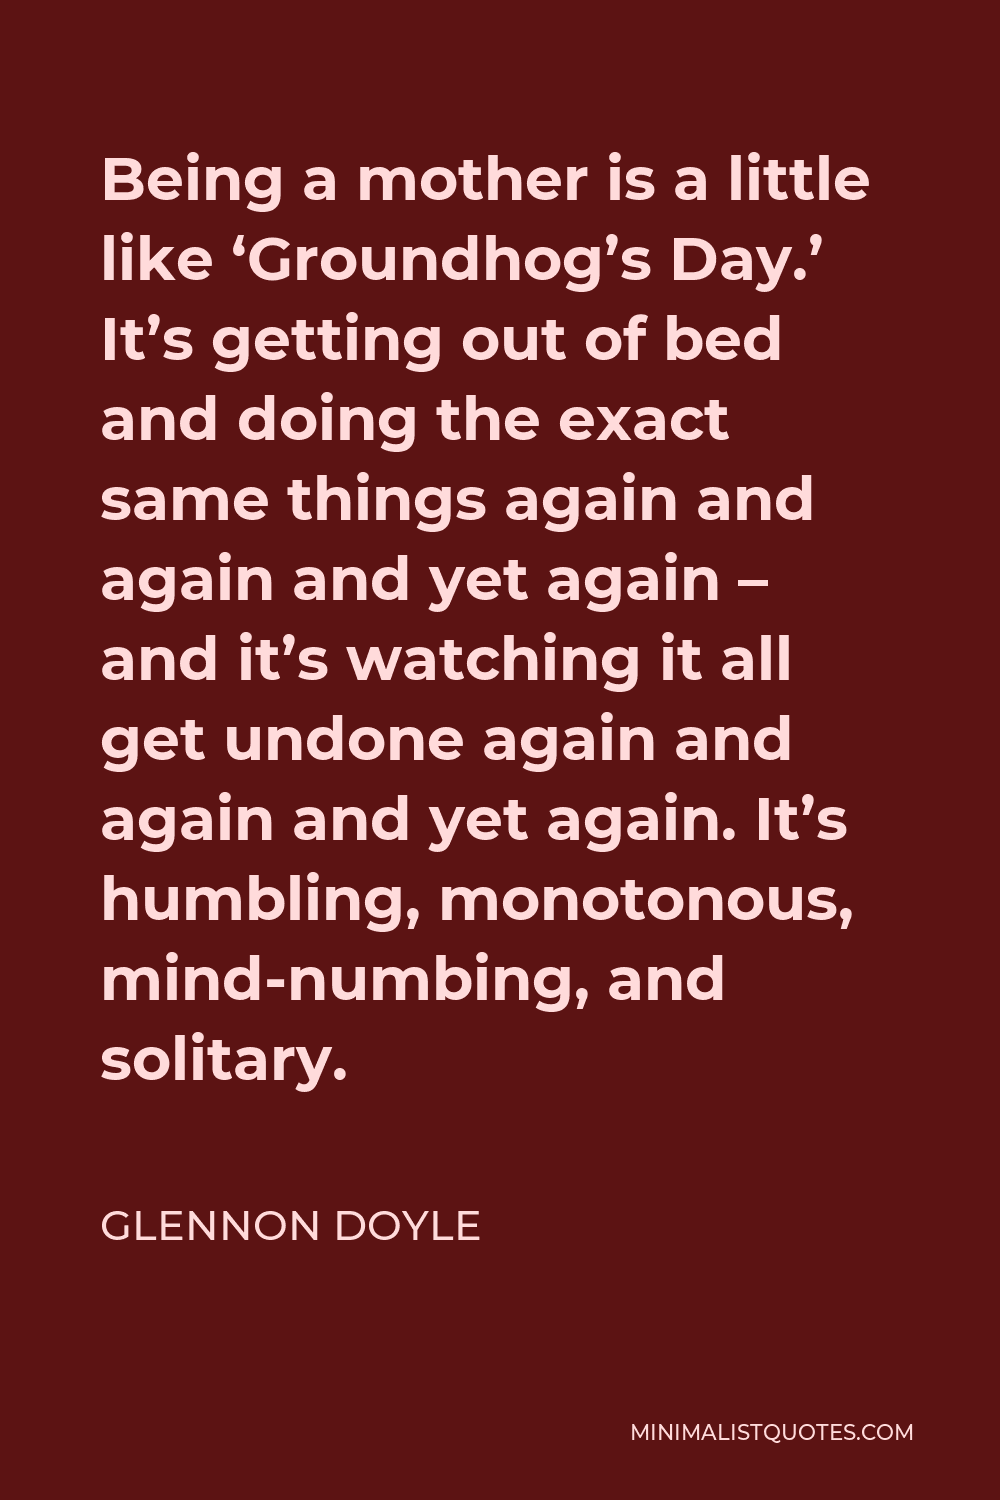 Glennon Doyle Quote - Being a mother is a little like ‘Groundhog’s Day.’ It’s getting out of bed and doing the exact same things again and again and yet again – and it’s watching it all get undone again and again and yet again. It’s humbling, monotonous, mind-numbing, and solitary.